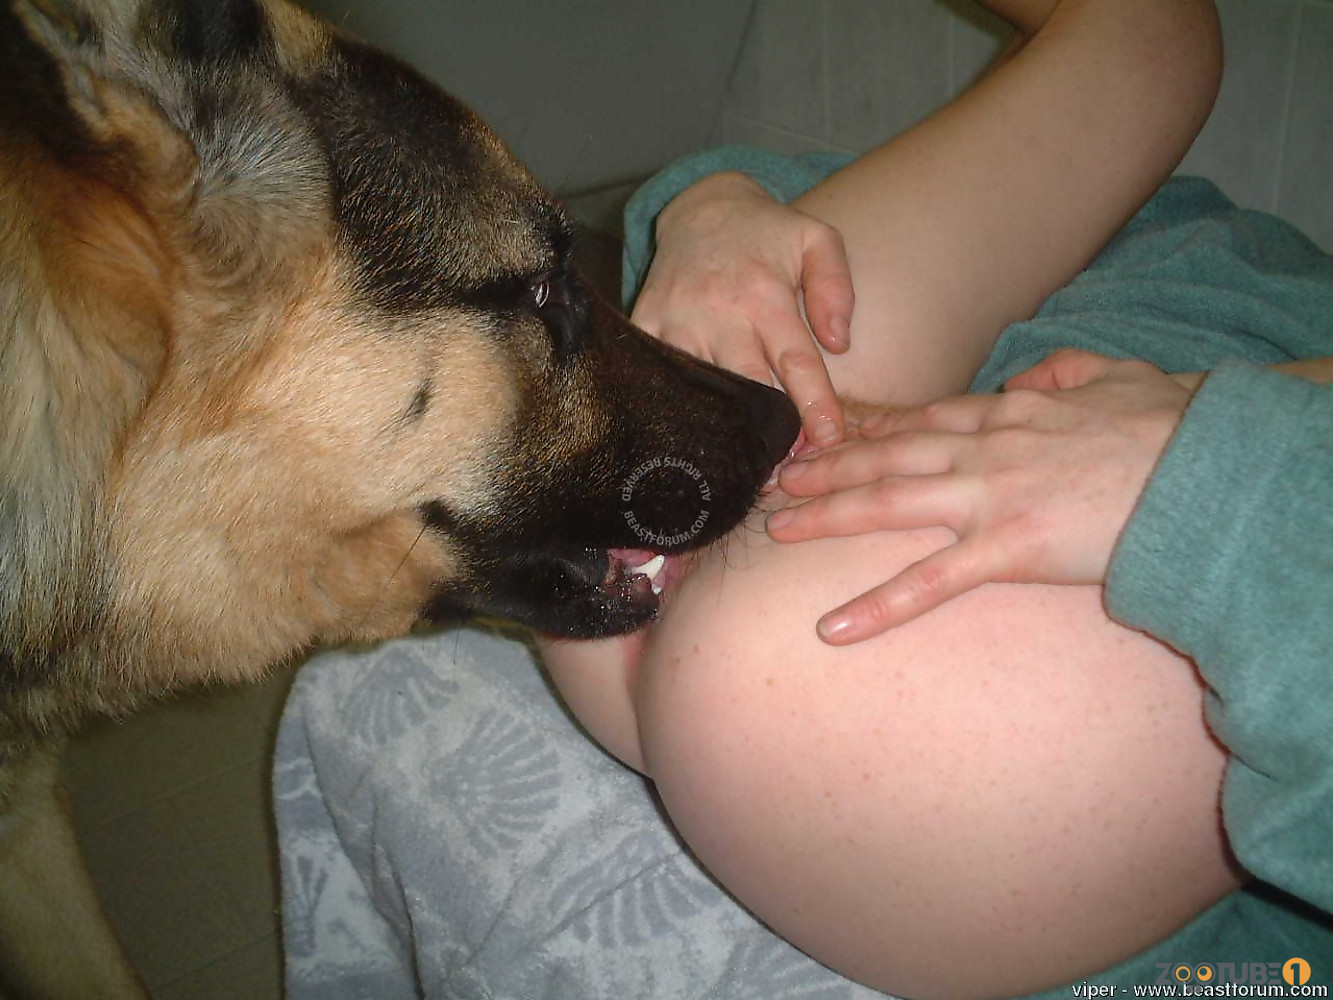 Amateur oral bestiality action with a trained beast